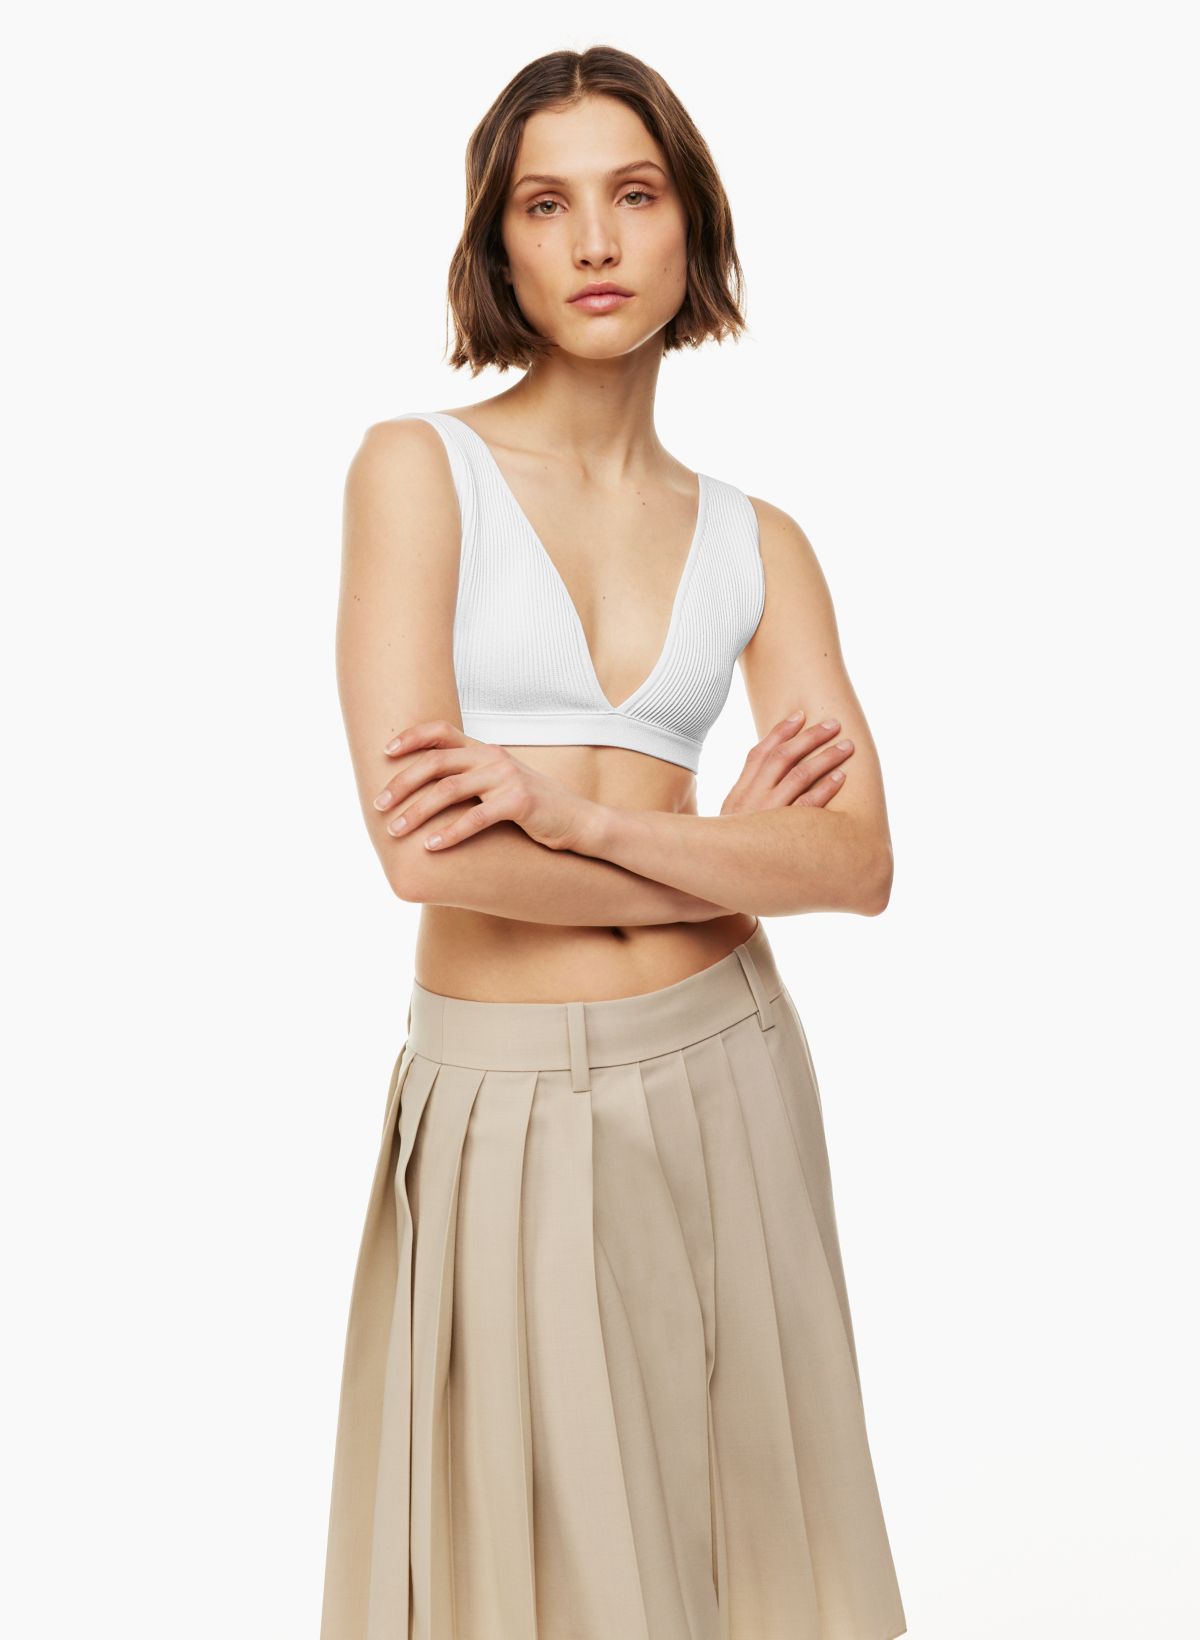 Aritzia Babaton deep taupe sculpt knit bra size medium - $37 New With Tags  - From Elizabeth